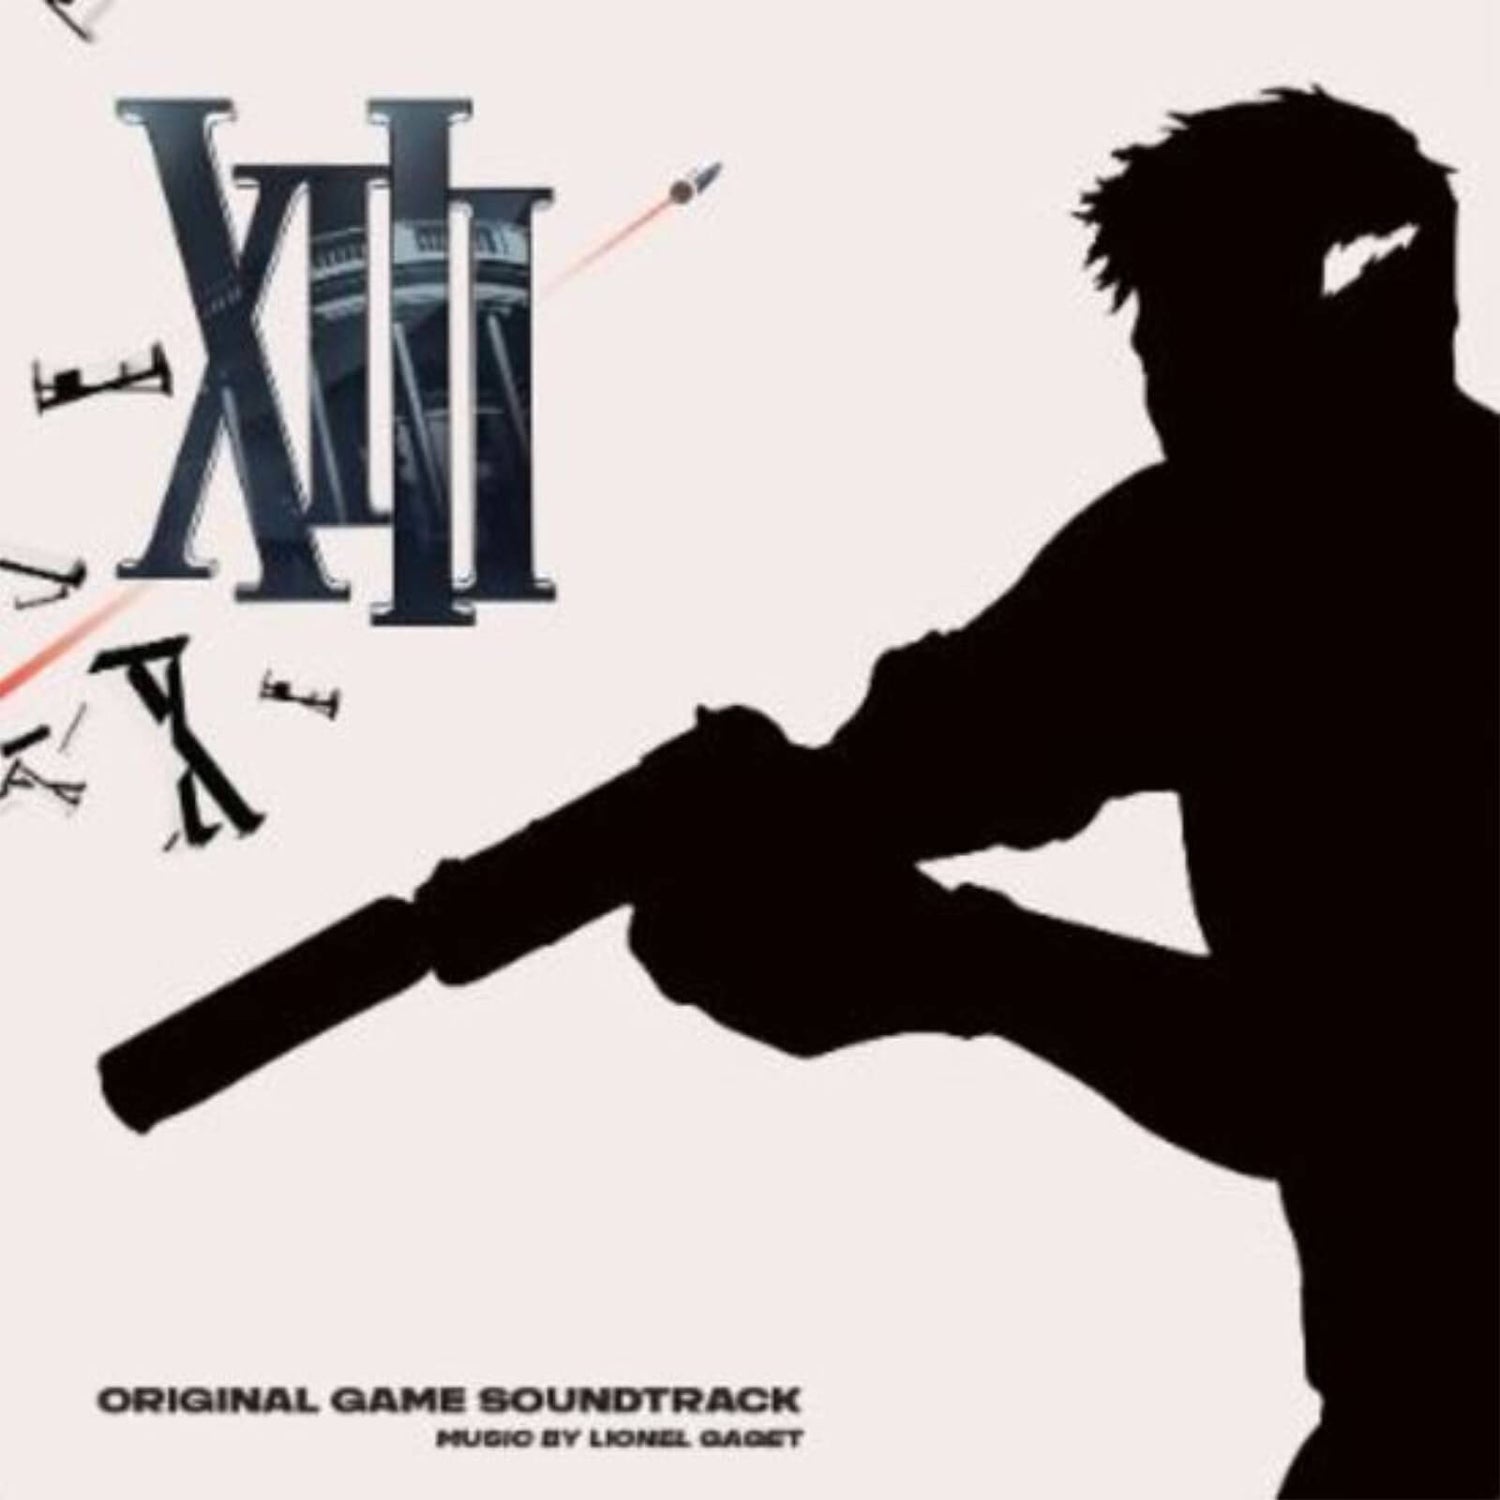 Laced Records - Xiii (Original Video Game Soundtrack) 180g Vinyl (Black and White)